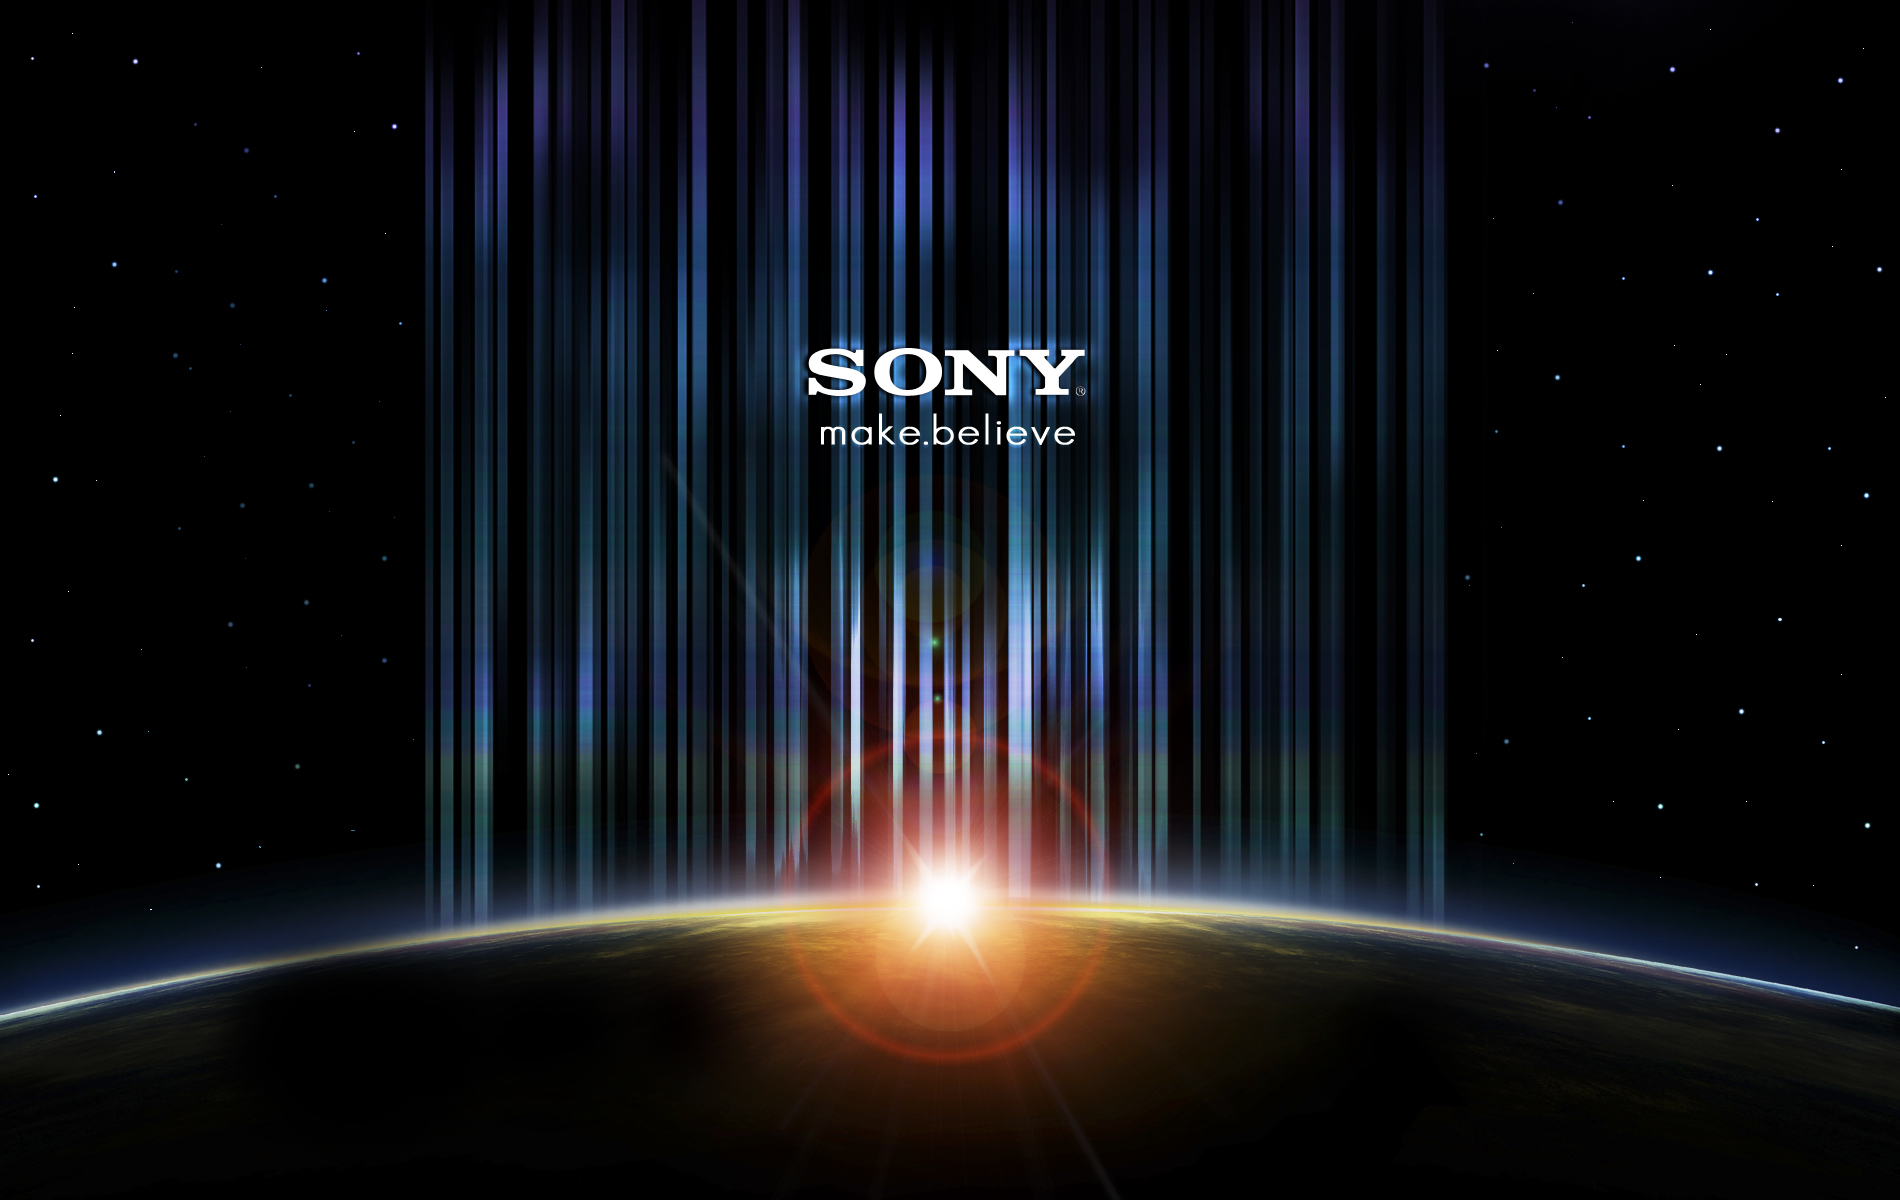 sony wallpaper full hd,atmosphere,stage,light,sky,astronomical object